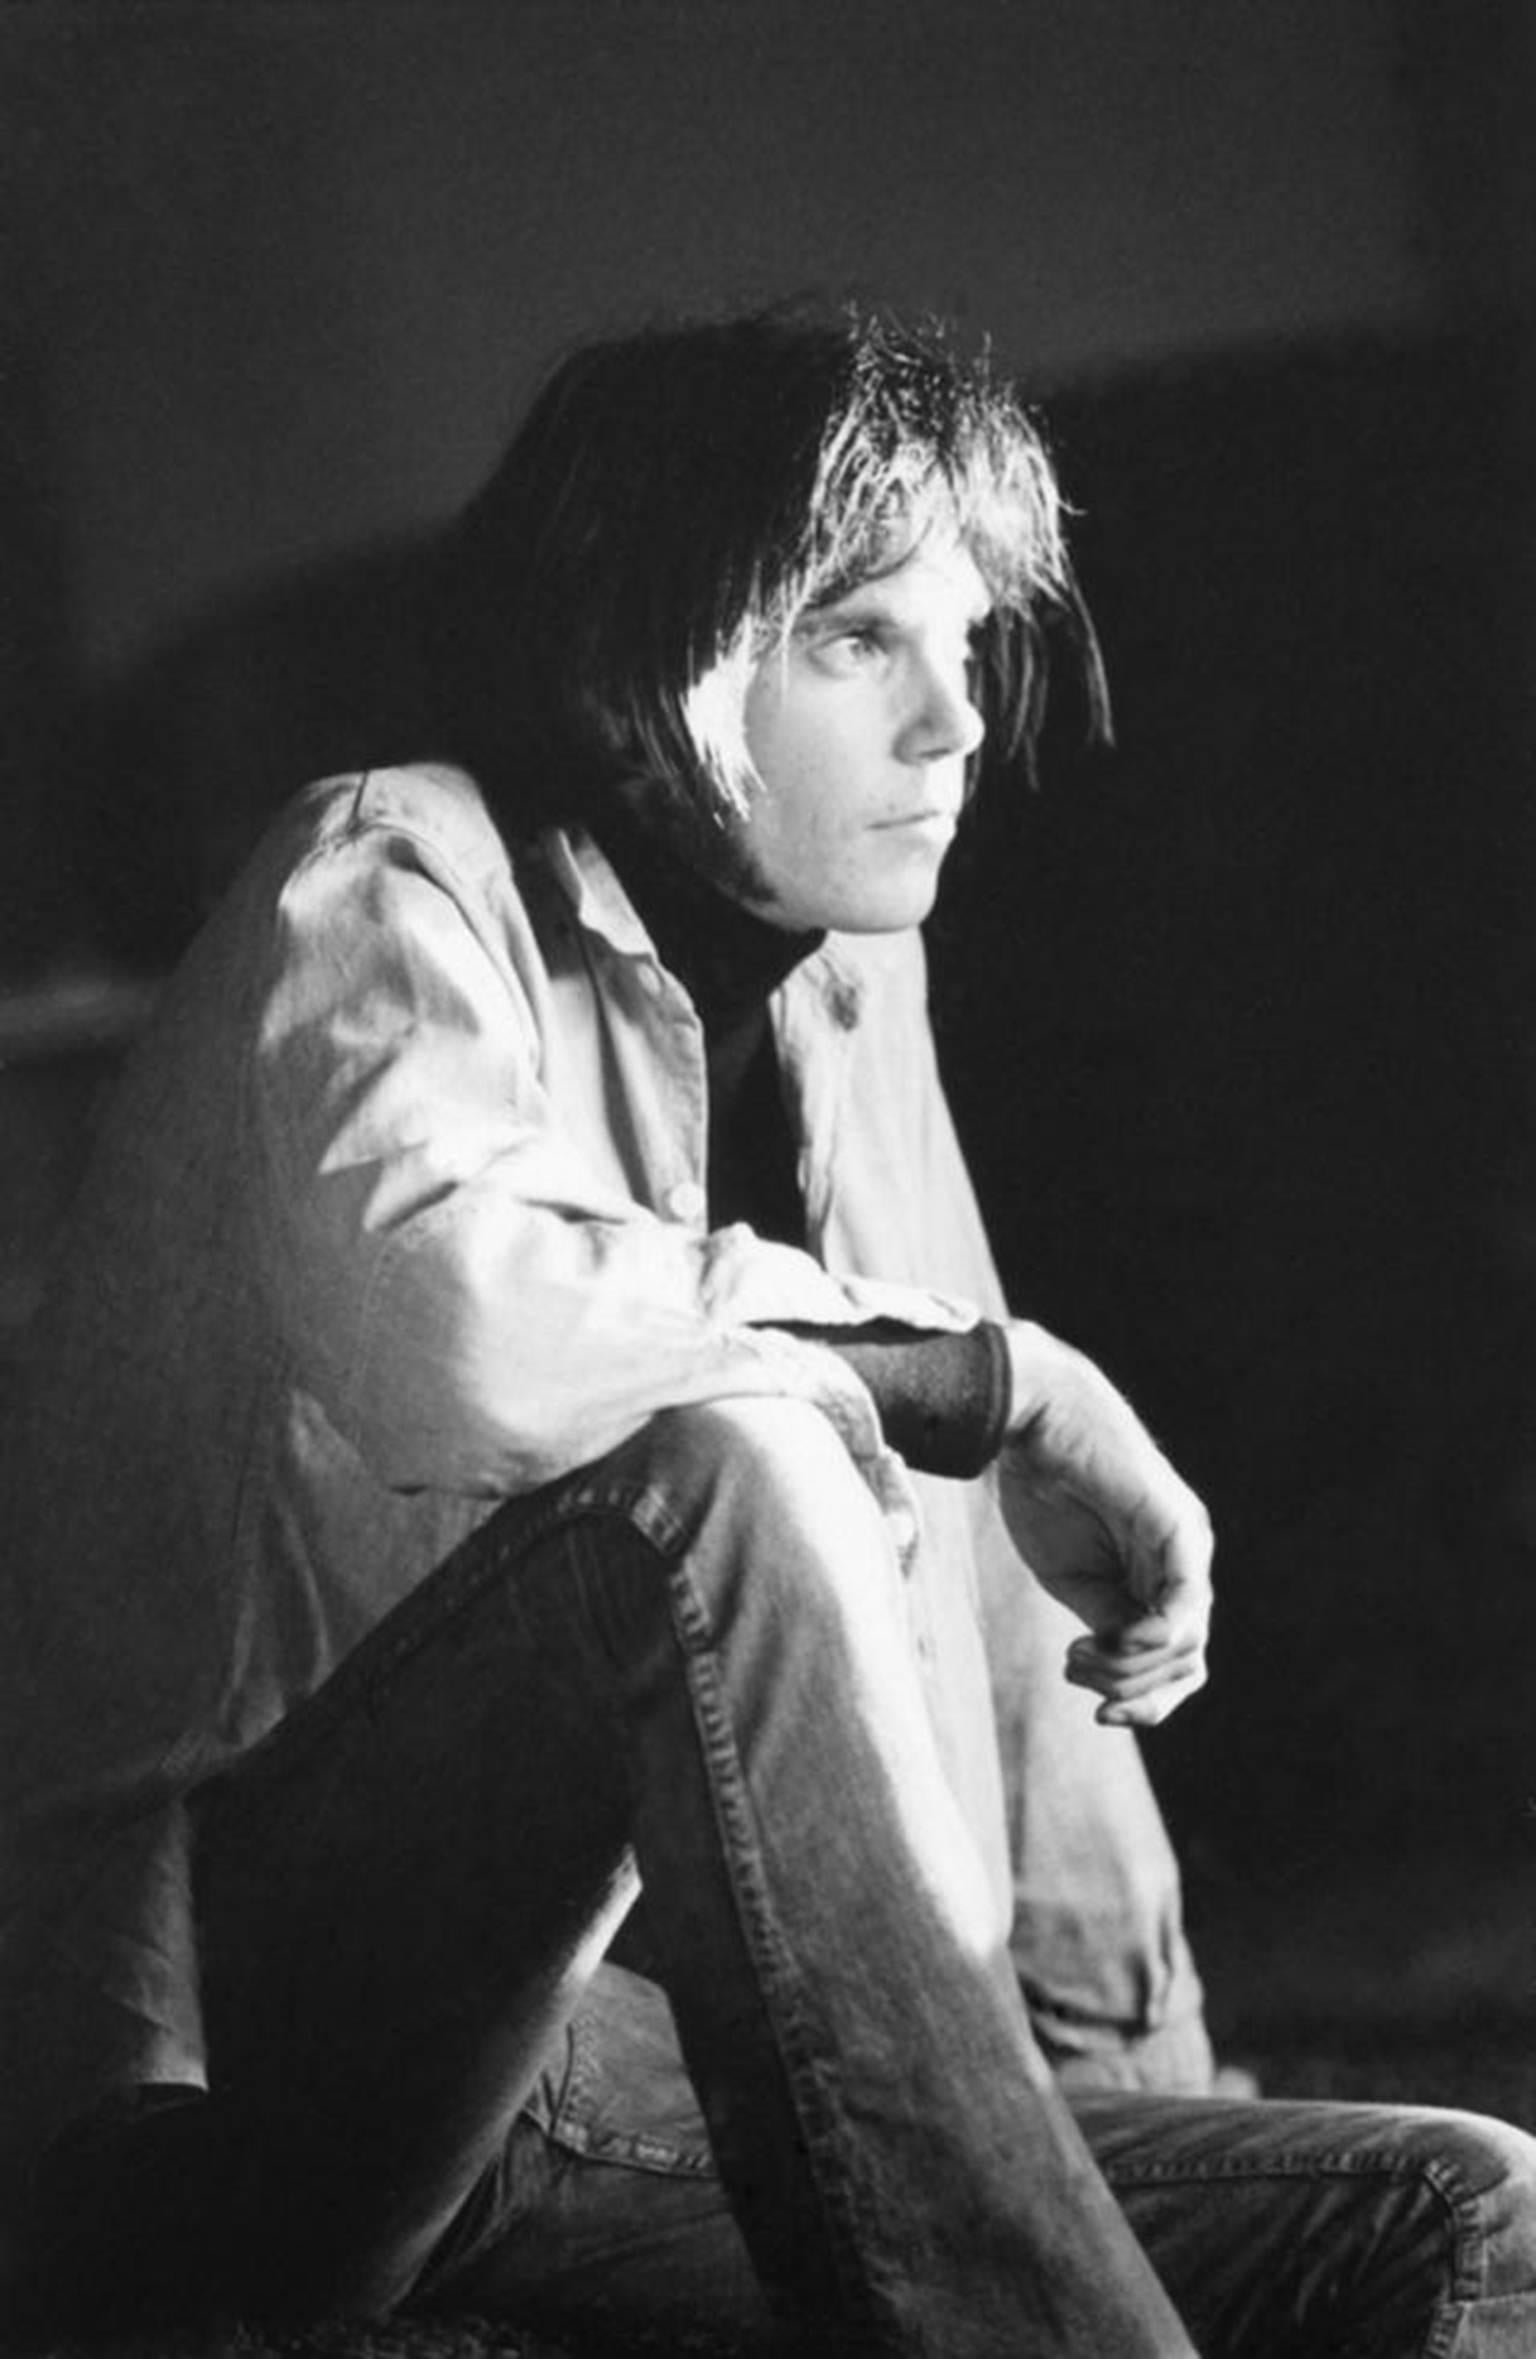 Graham Nash Black and White Photograph – Neil Young